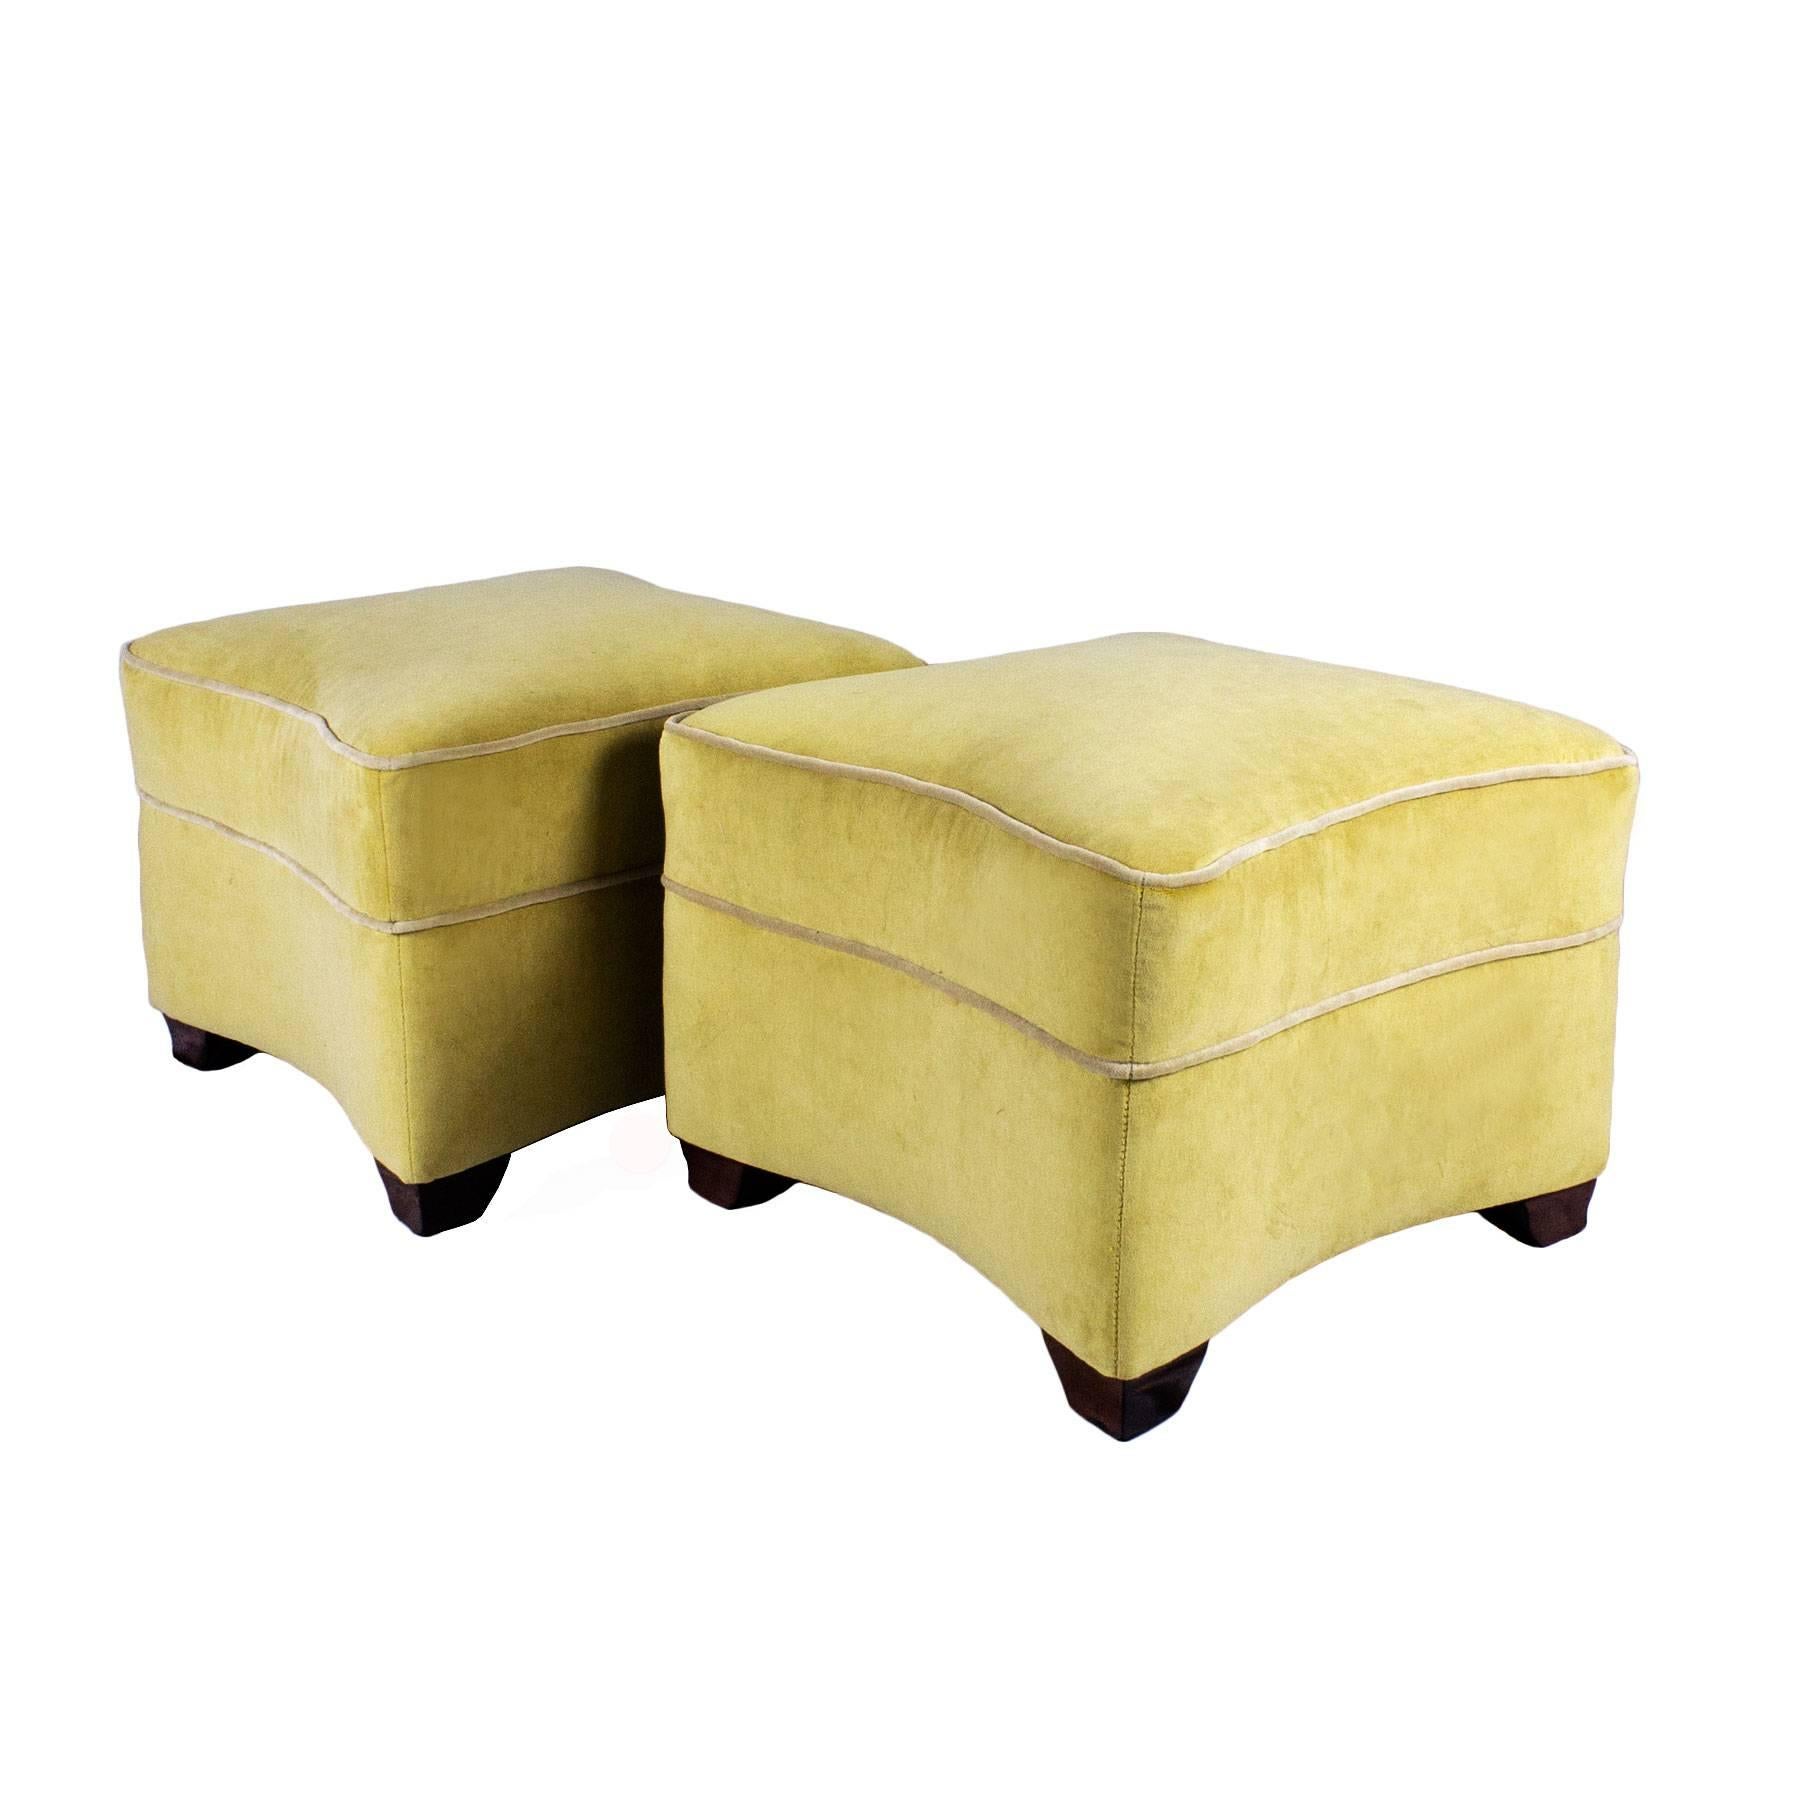 Outstanding pair of Art Deco ottomans, wood structure, new stuffing and light yellow velvet upholstery, done as in the originals. Four mahogany feet with signature and numbered, French polish. New fabric at the bottom with the originals furniture